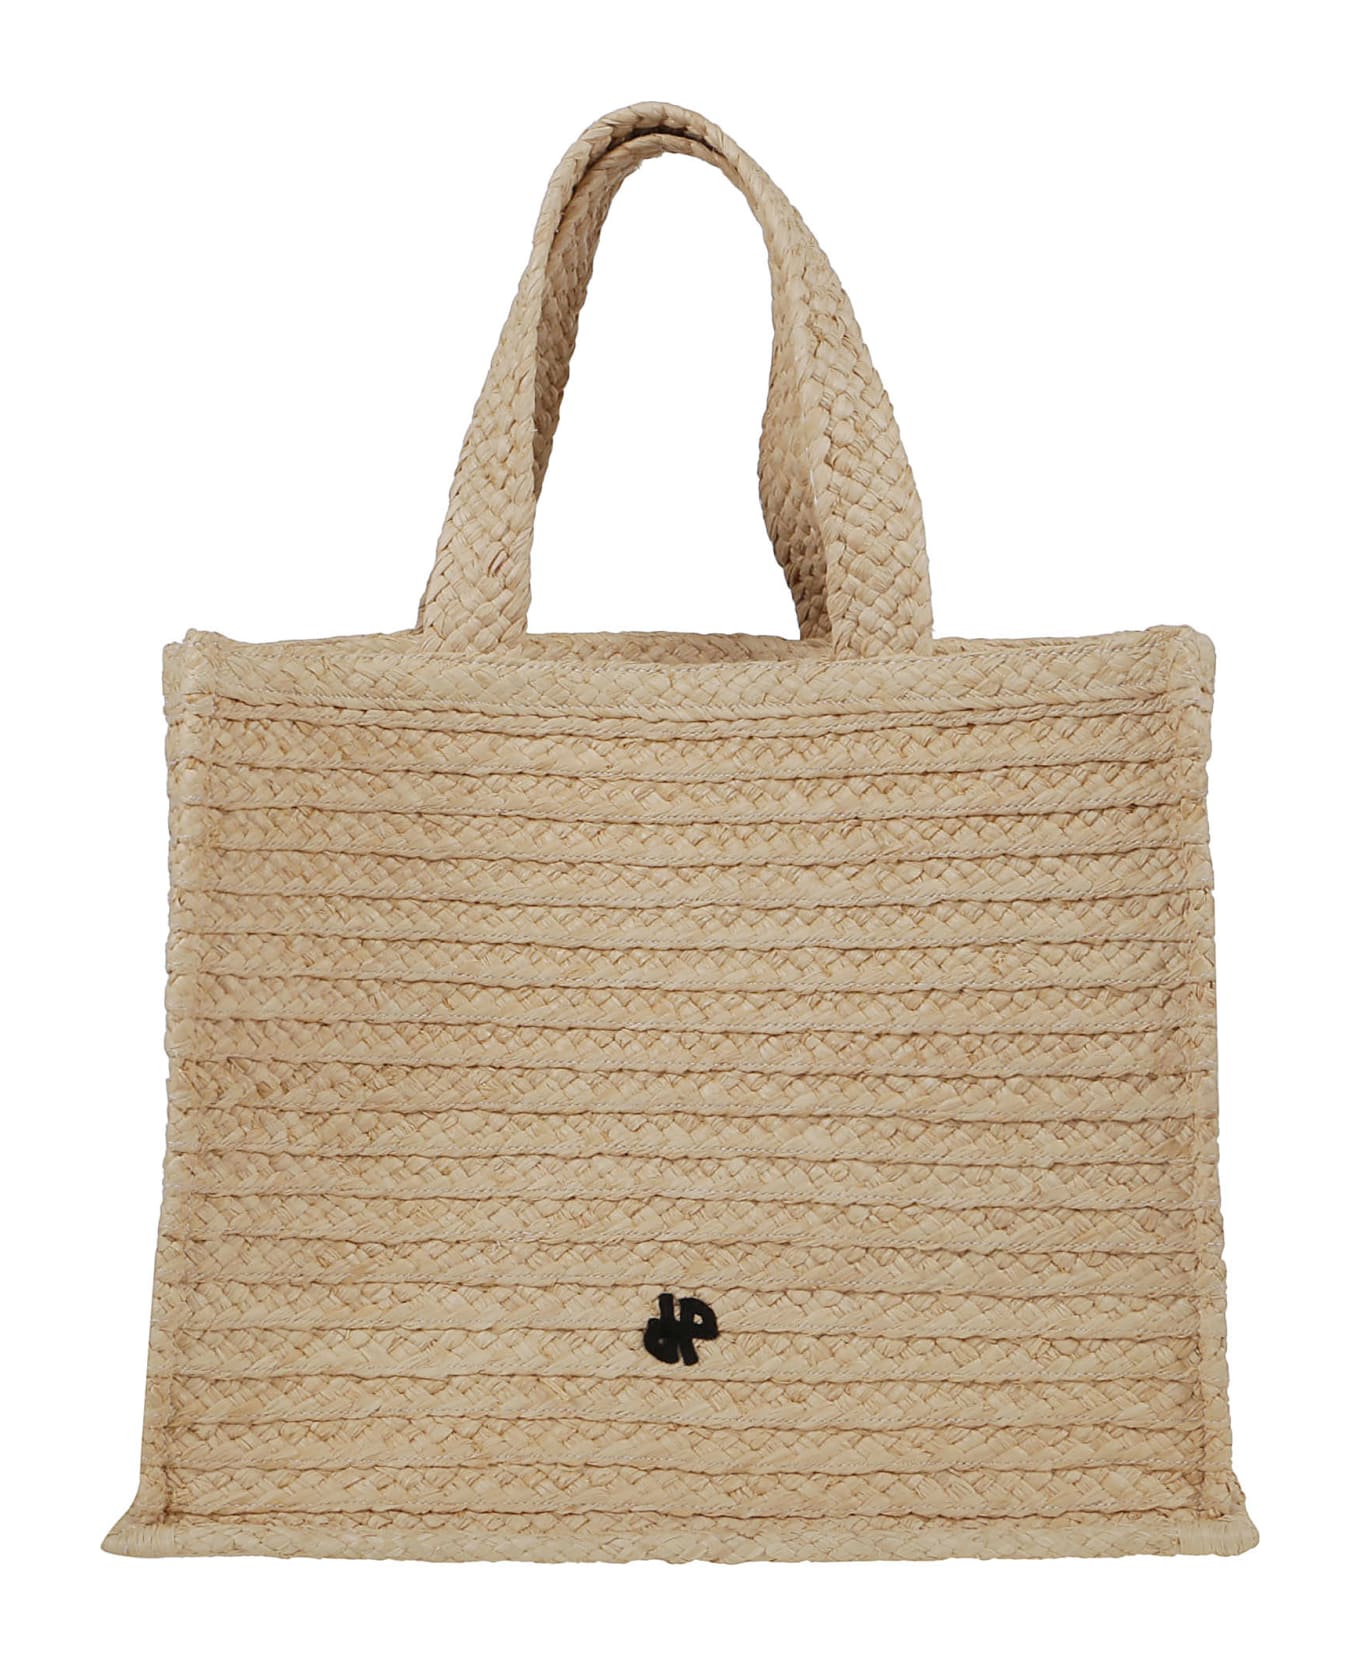 Patou Large Tote Bag - BEIGE トートバッグ